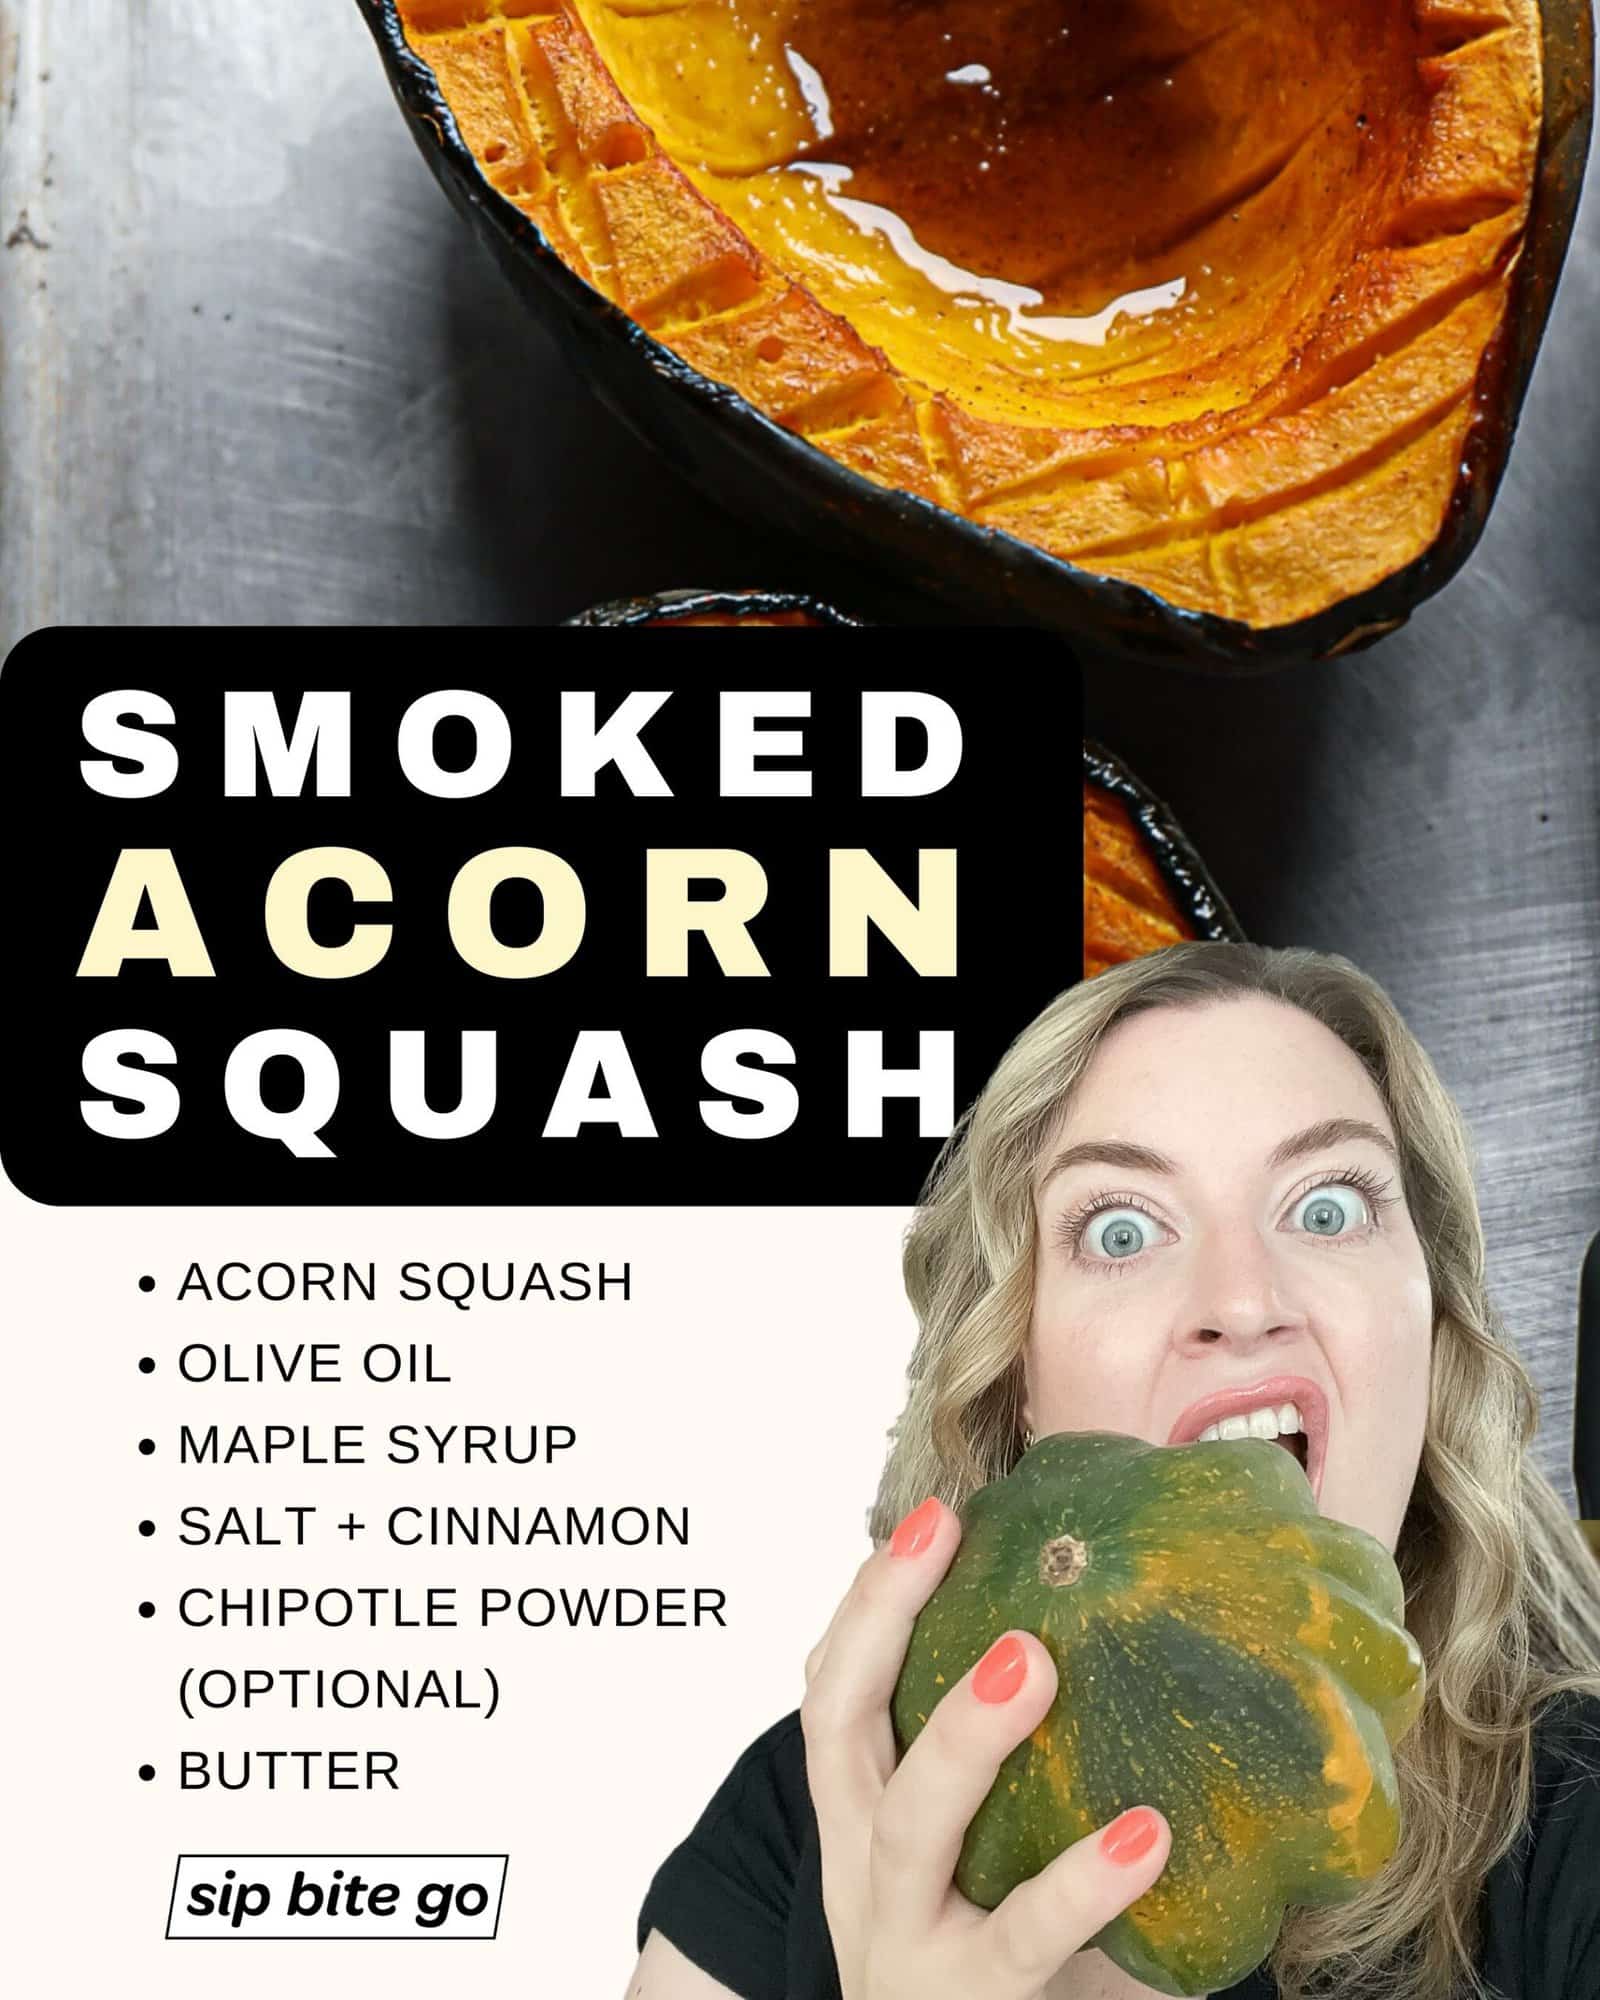 Infographic with ingredient list for smoking acorn squash on traeger pellet grills with Jenna Passaro smoked foods blogger from Sip Bite Go